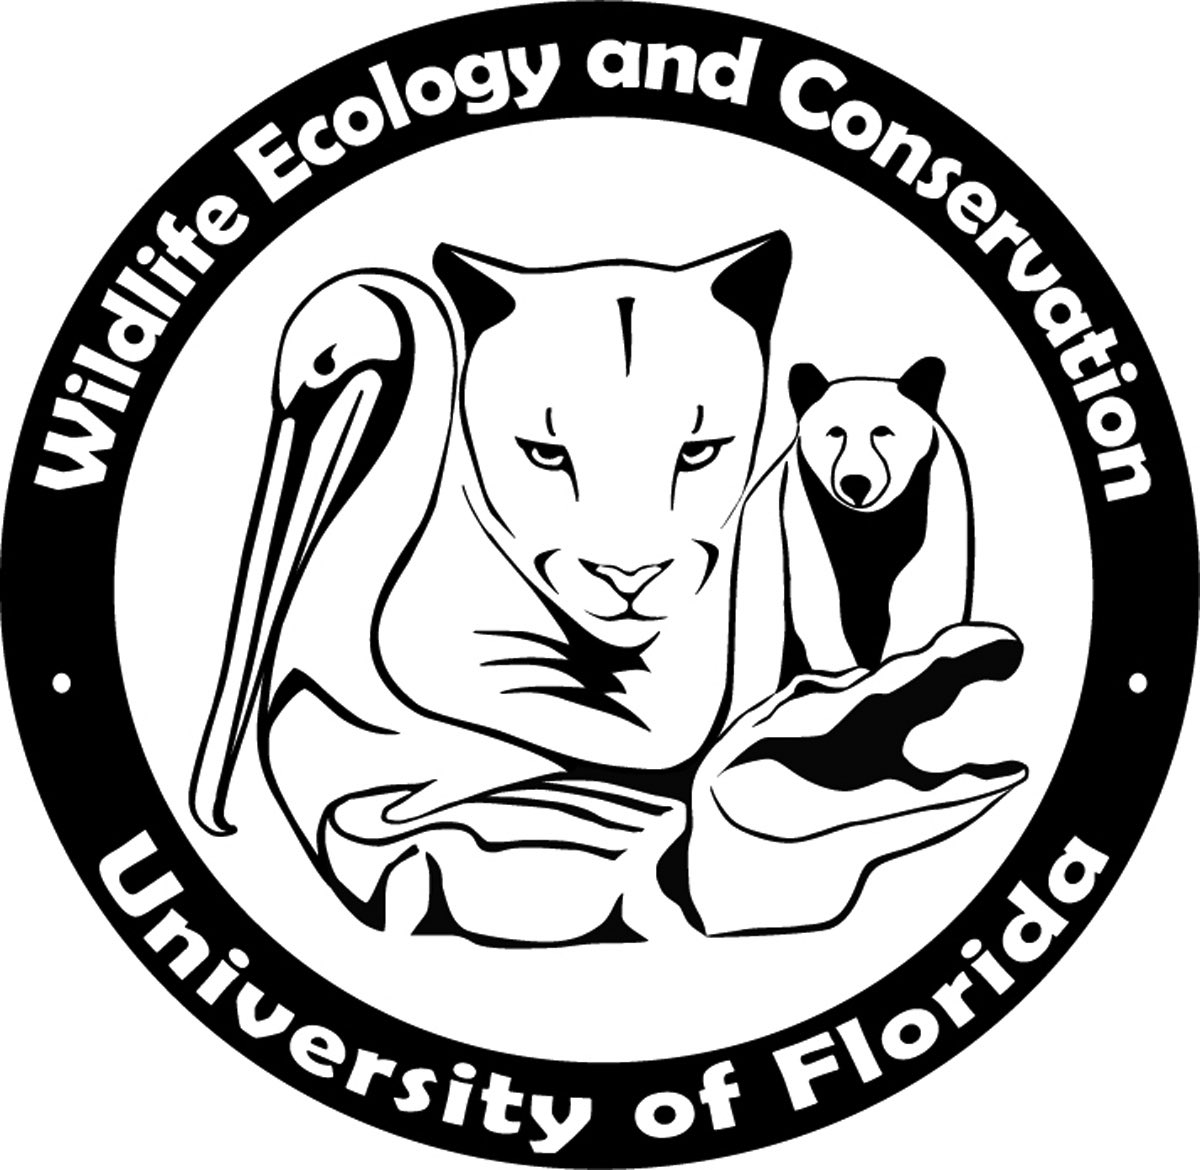 We (@UFWildlife) are looking for a quantitative ecologist (tenure accruing, 40% teaching / 60% research)… Please share, inquire, or apply! explore.jobs.ufl.edu/en-us/job/5304…